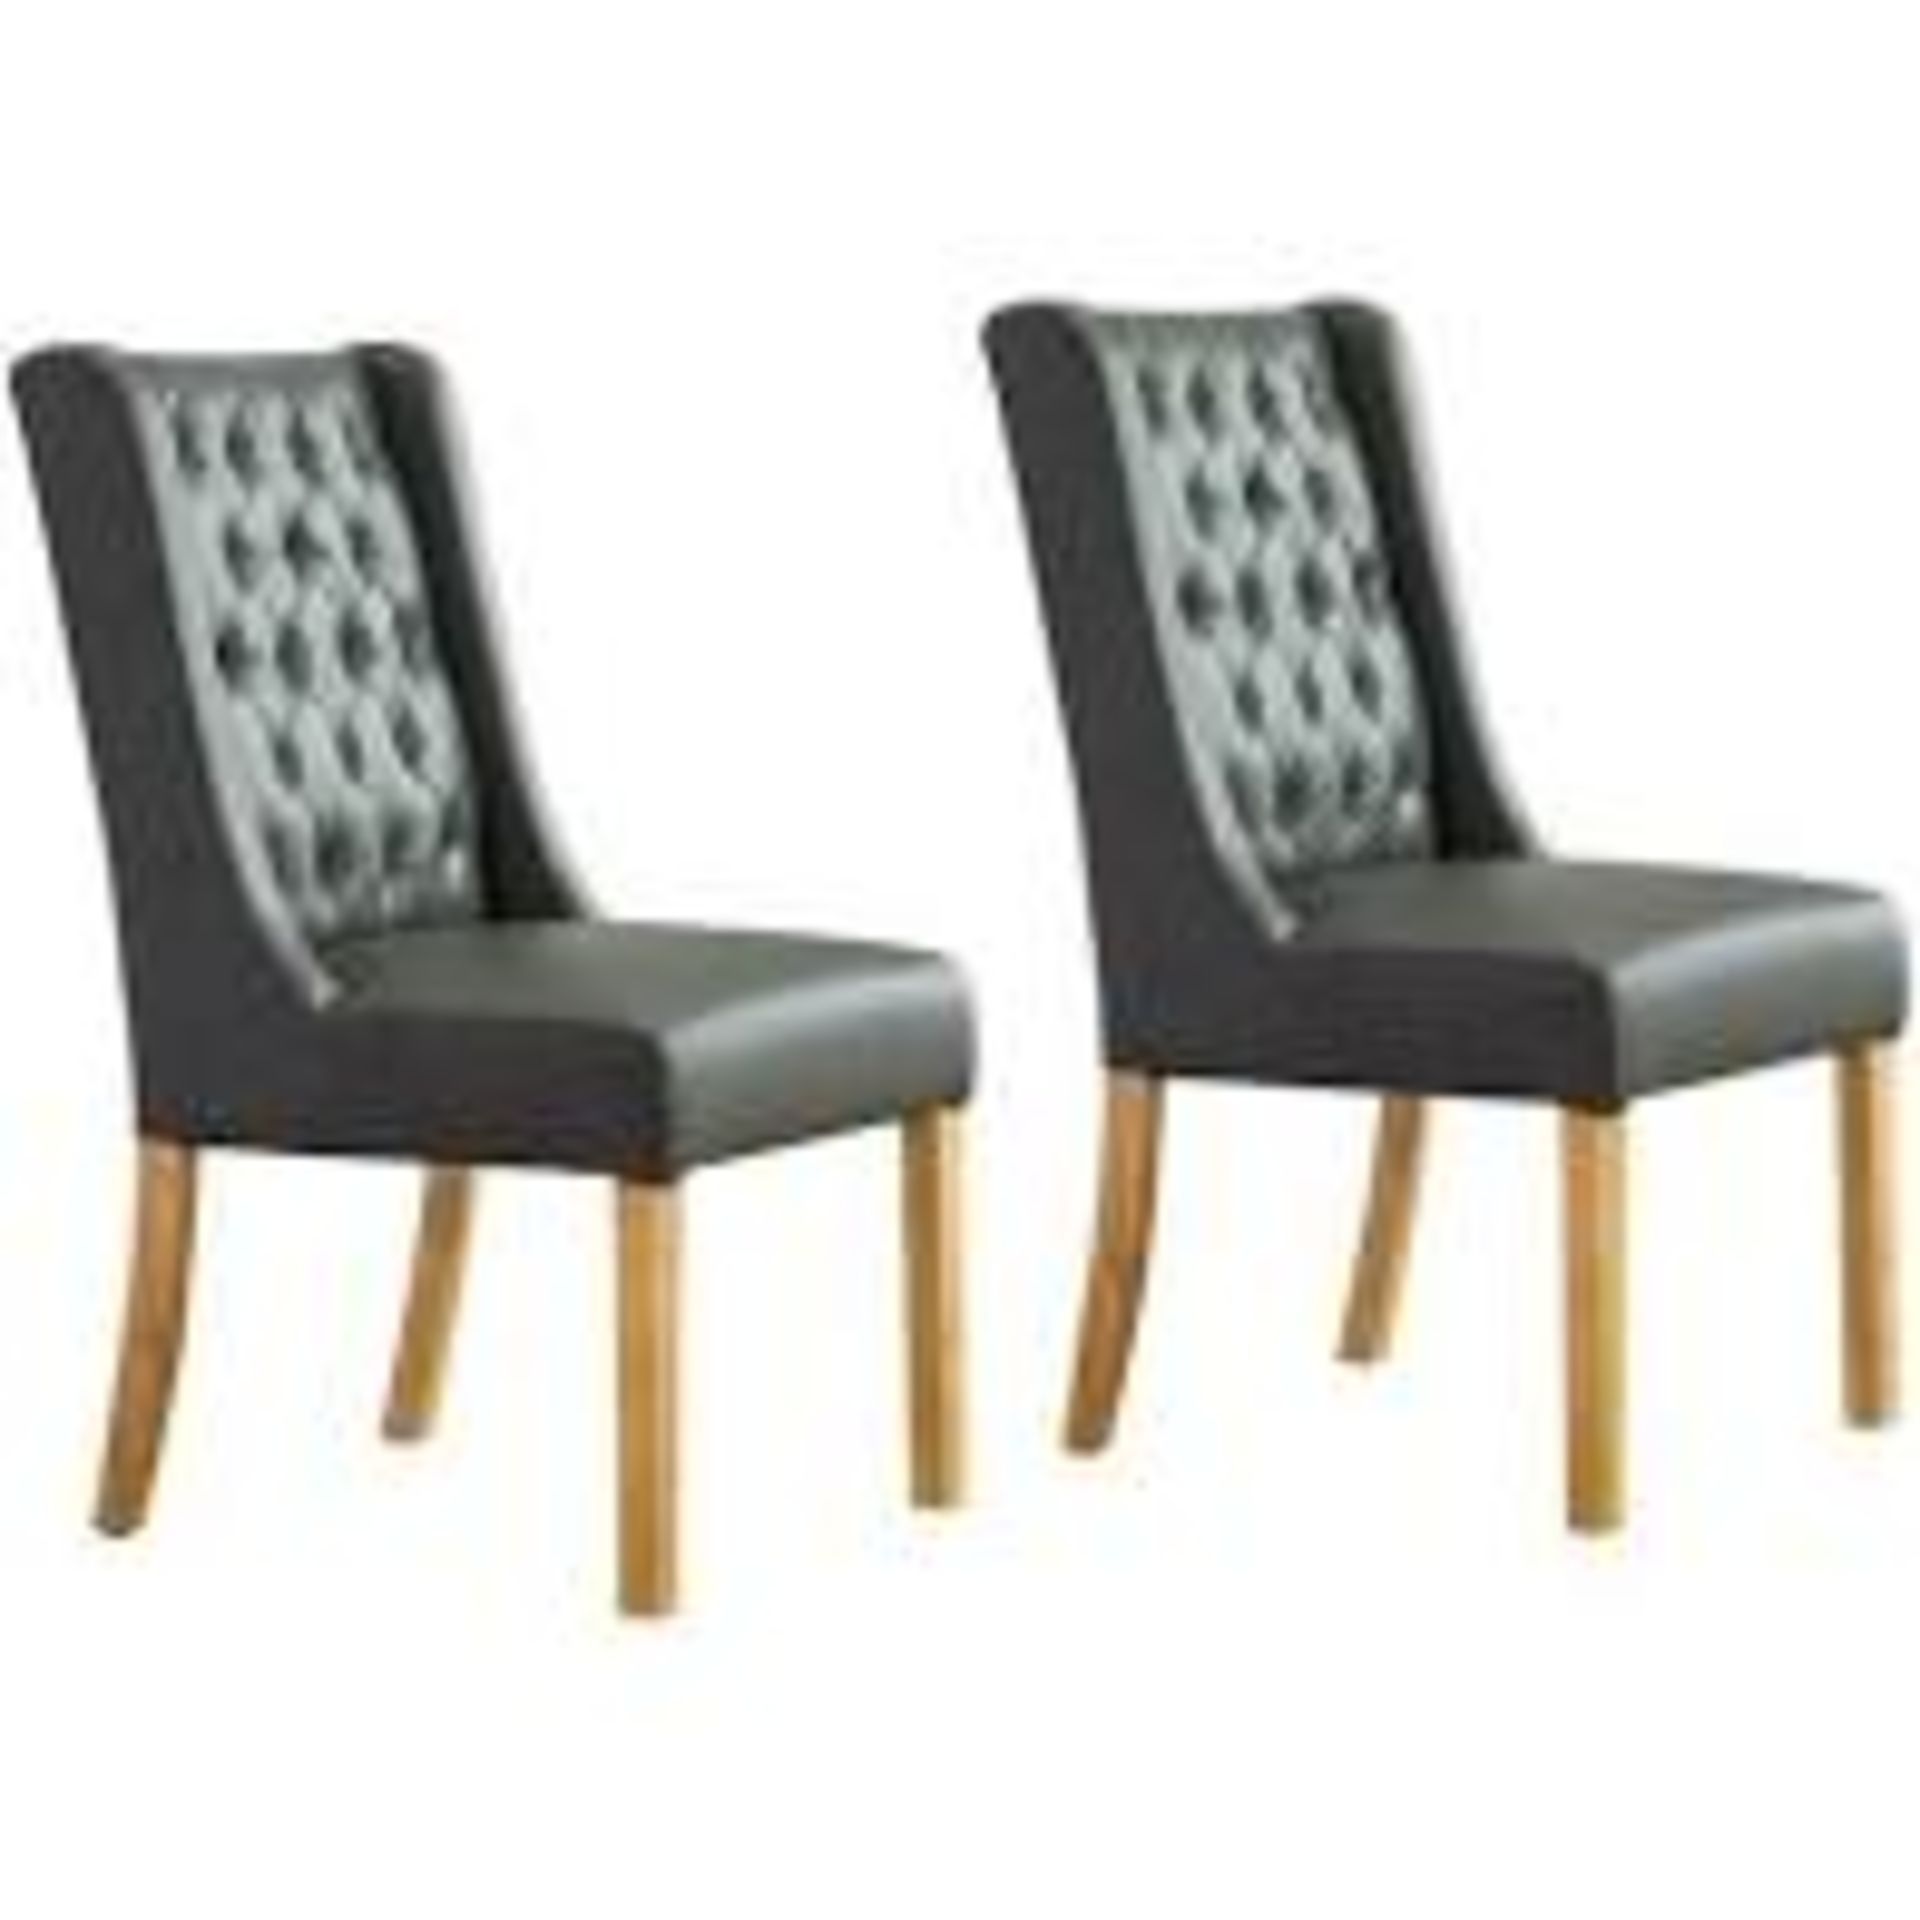 Boxed Set of 2 Olivia Plum And Burgandy Fabric Designer Dining Chairs RRP £255 (17862)